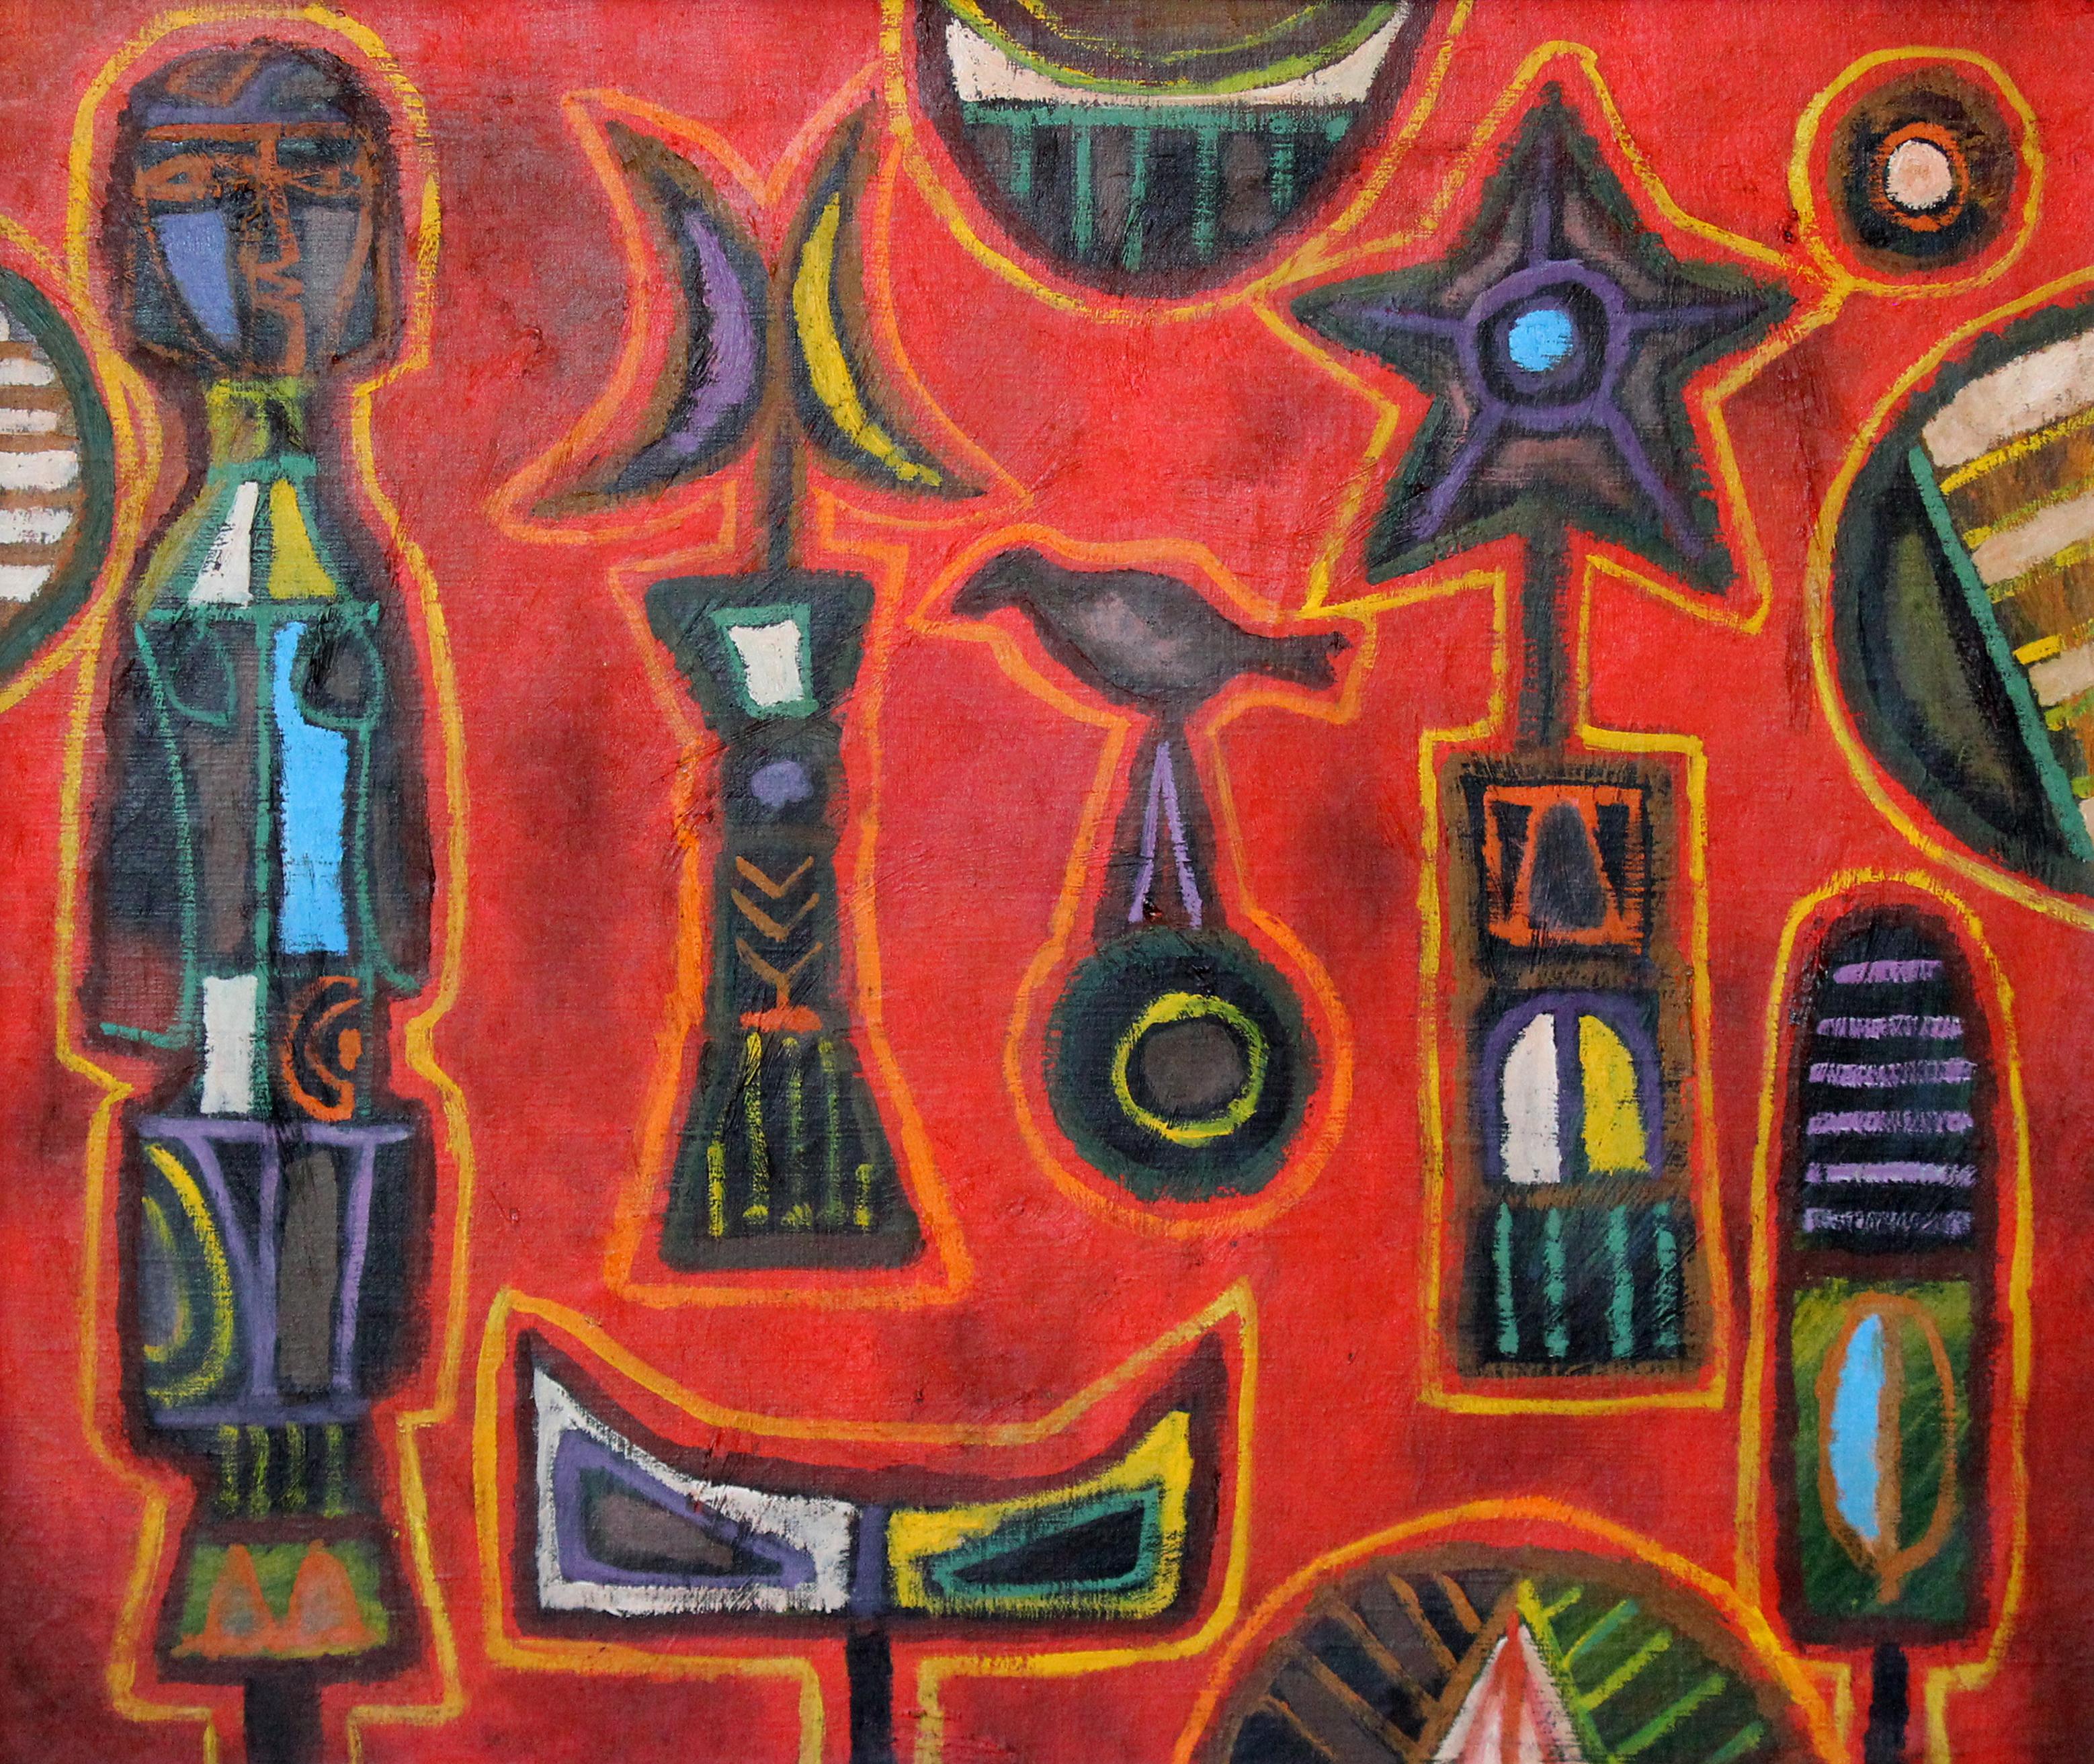 Orange Abstract, Native American Objects, Cultural Commentary by Female Artist